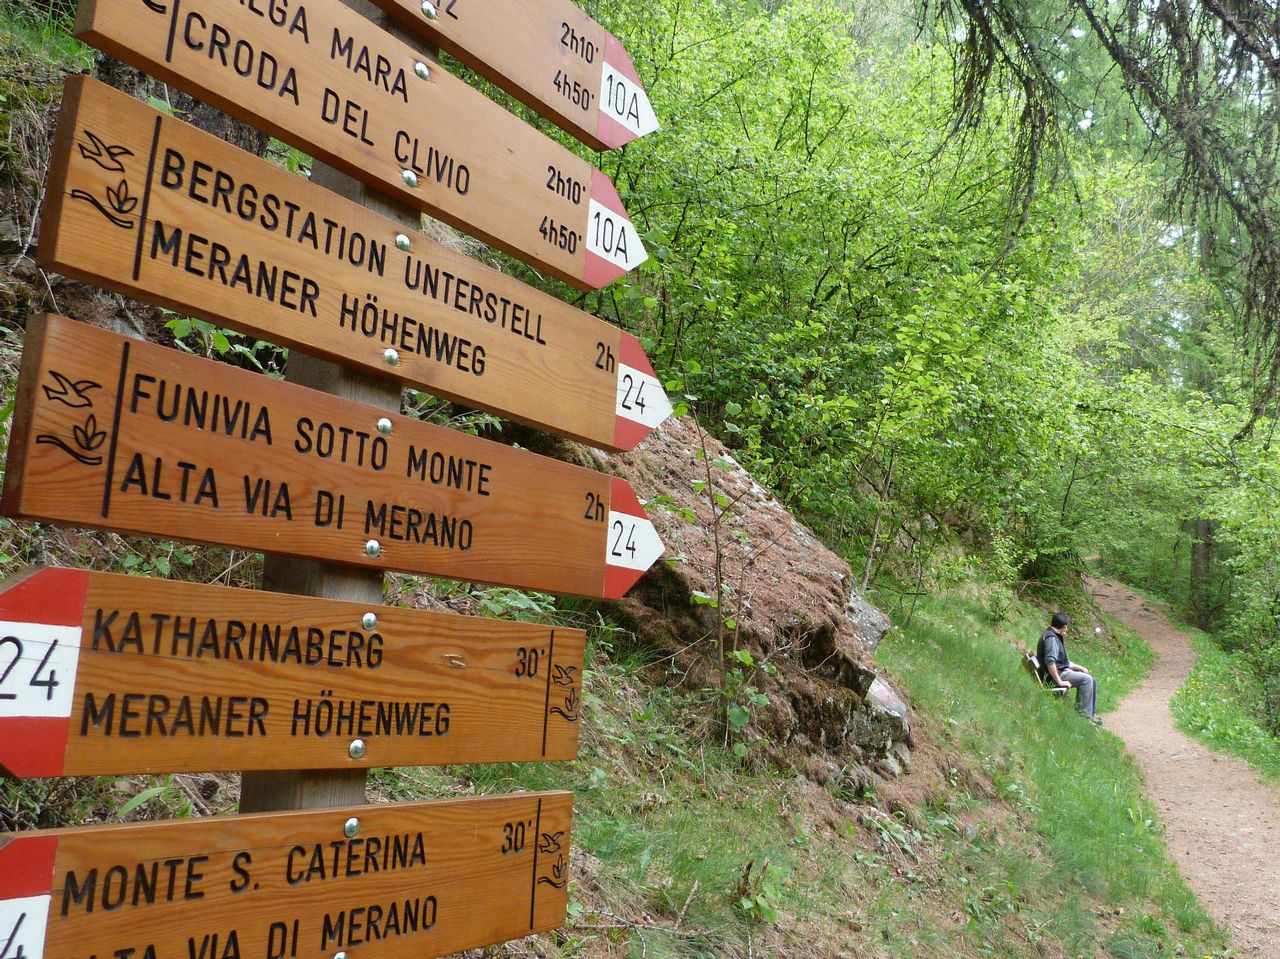 Merano High Mountain Trail Stage Suggestion No. 3: from Monte S. Caterina/Katharinabger to Mountian pasture Eishof